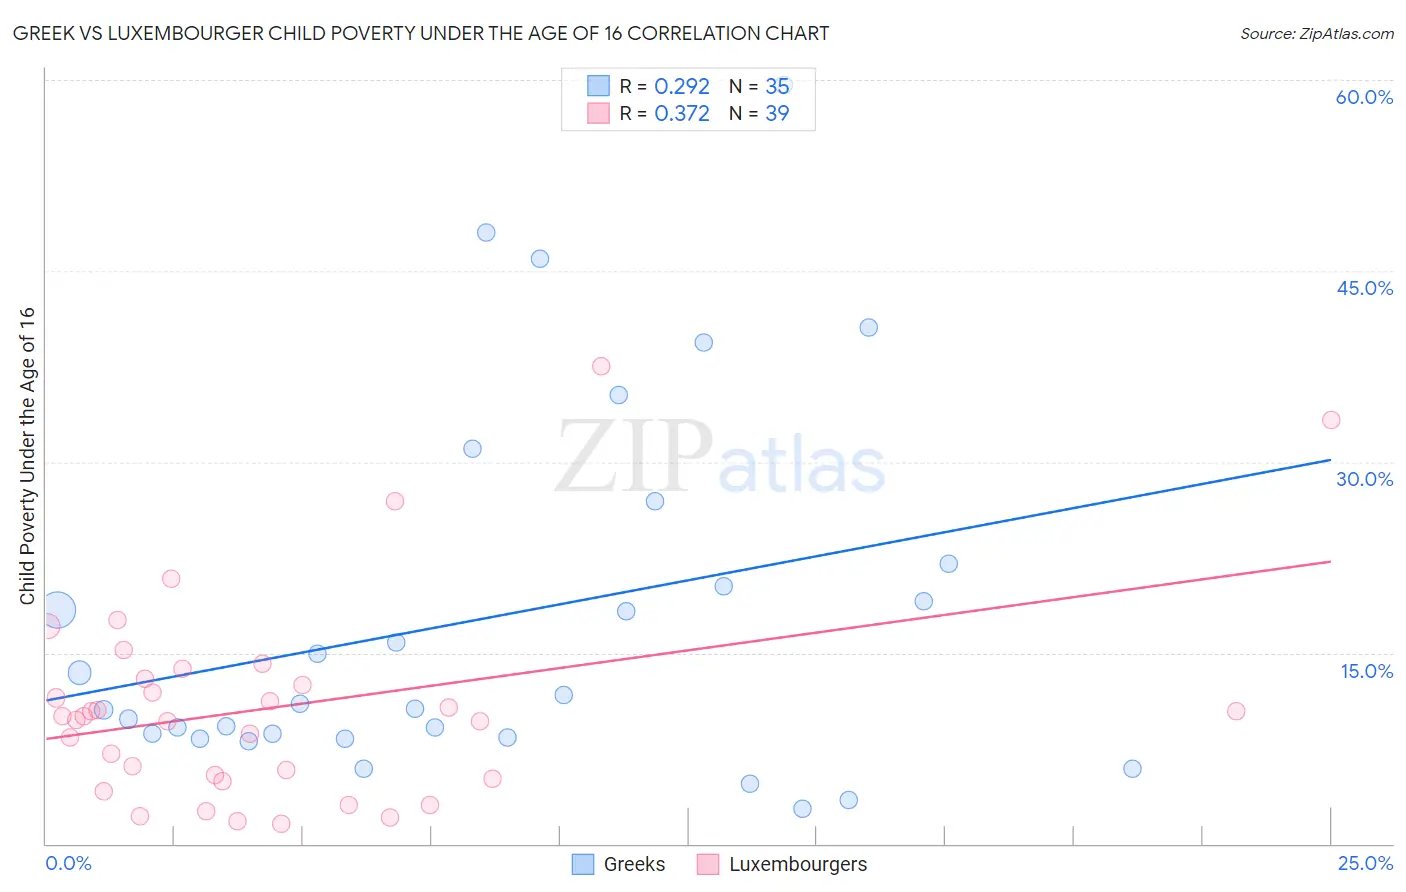 Greek vs Luxembourger Child Poverty Under the Age of 16